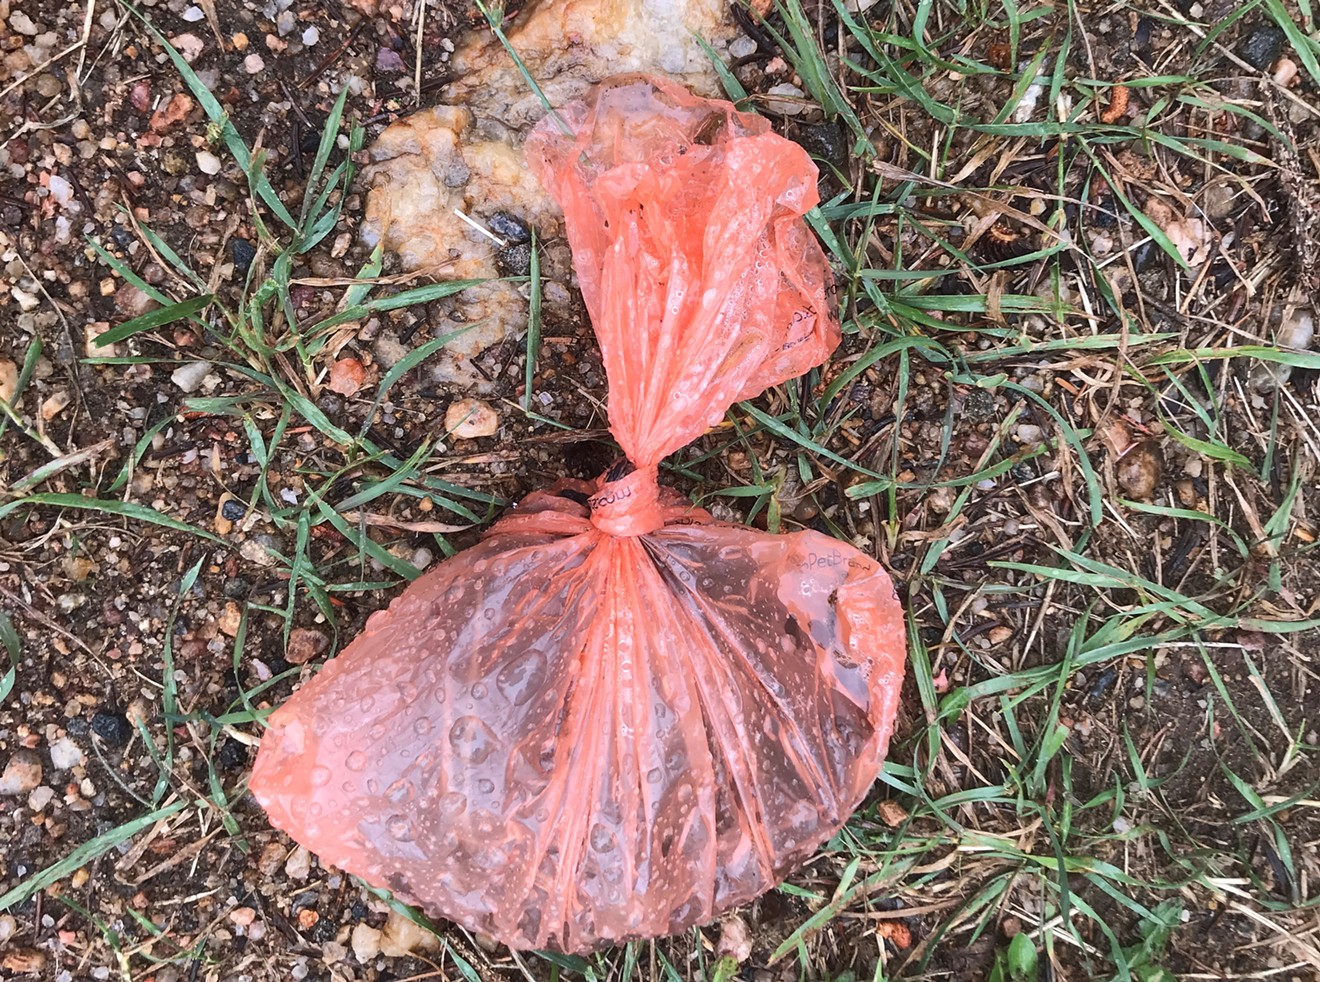 The ultimate marking of a trail jerk: the abandoned dog poop sack.